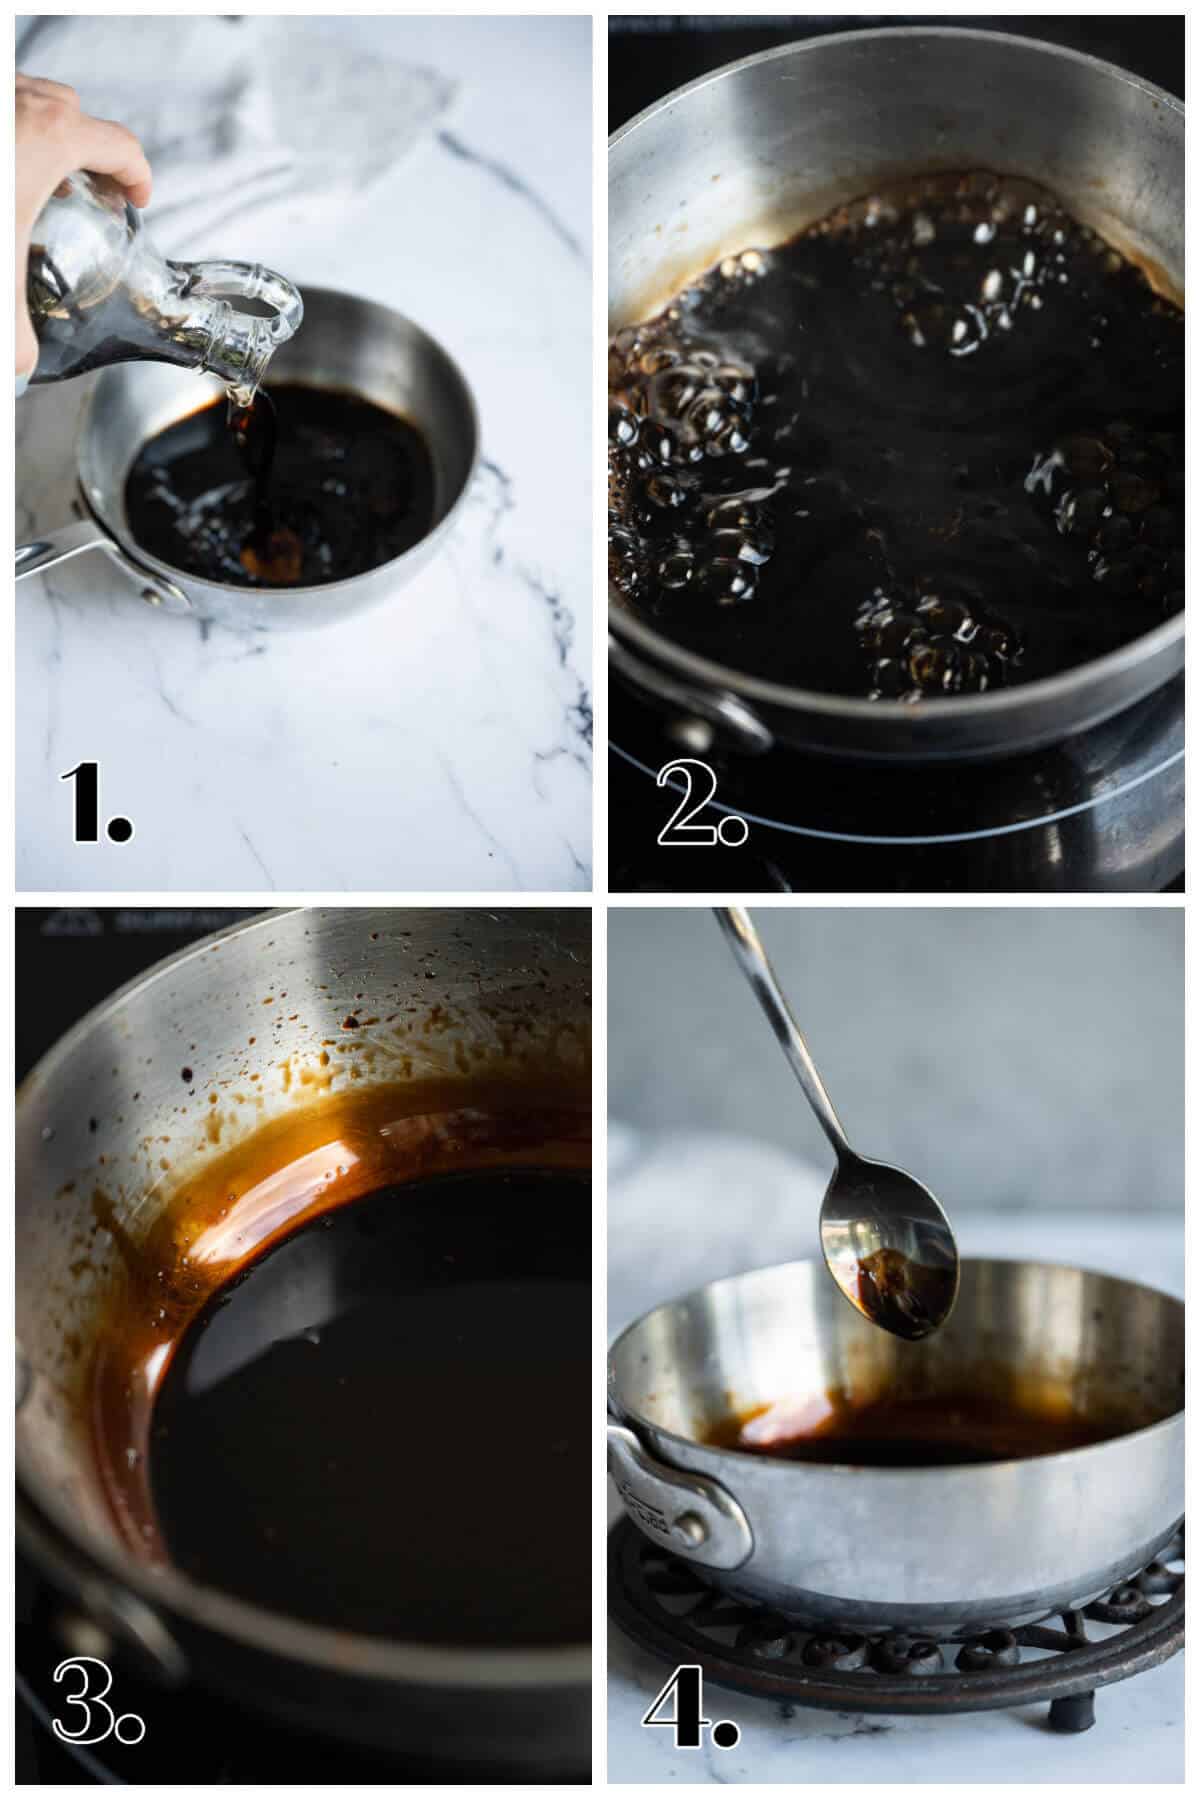 4 image collage showing the steps to making balsamic reduction. 1- vinegar in saucepan. 2- boiling vinegar. 3- reduced vinegar in a saucepan. 4-reduction sauce coating a spoon.